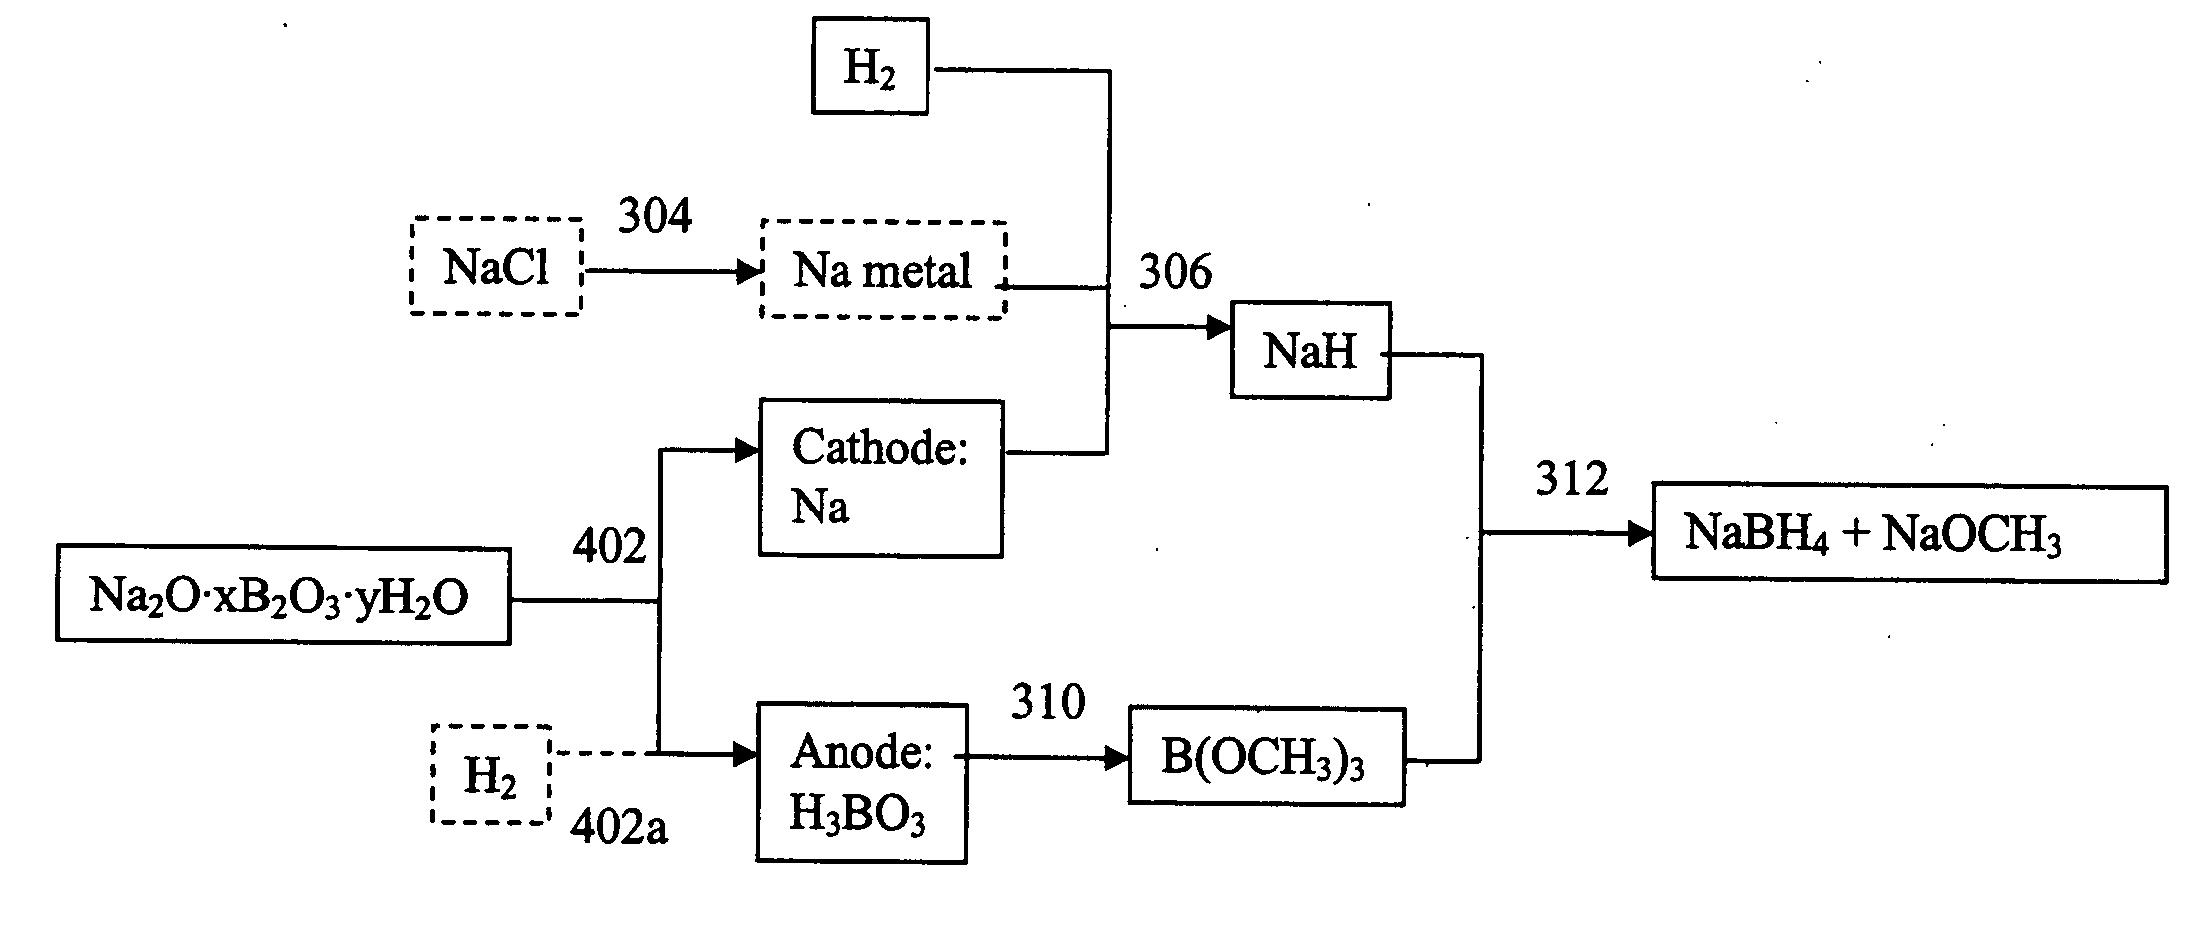 Processes for separating metals from metal salts